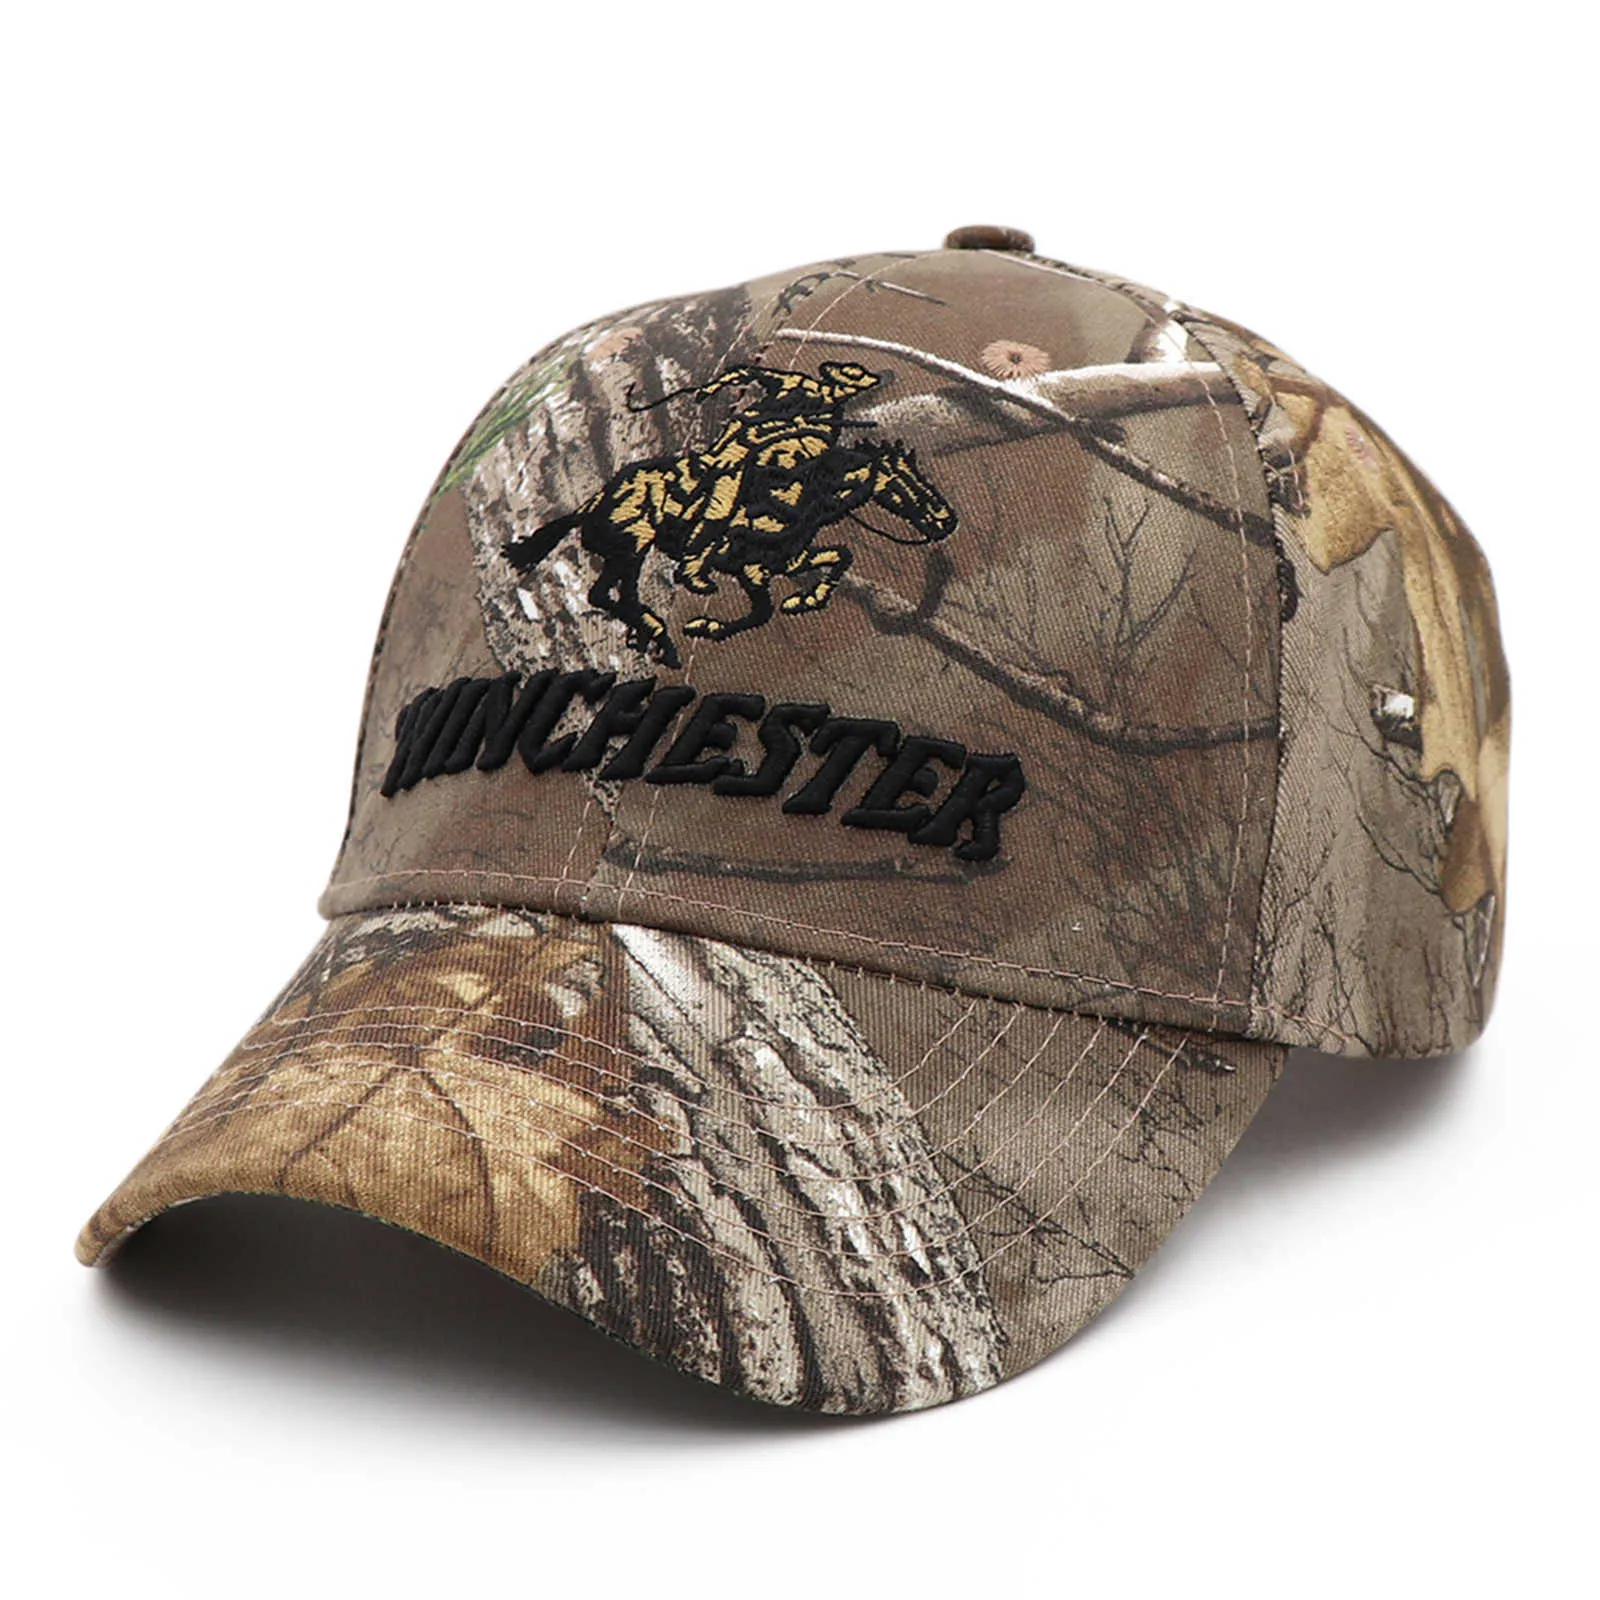 2021 Tactical Winchester Shooting Sports CAMO Realtree Baseball Cap For Men  Perfect For Fishing, Hunting, Hiking And Jungle Activities HKD230625 From  Mdck, $7.35